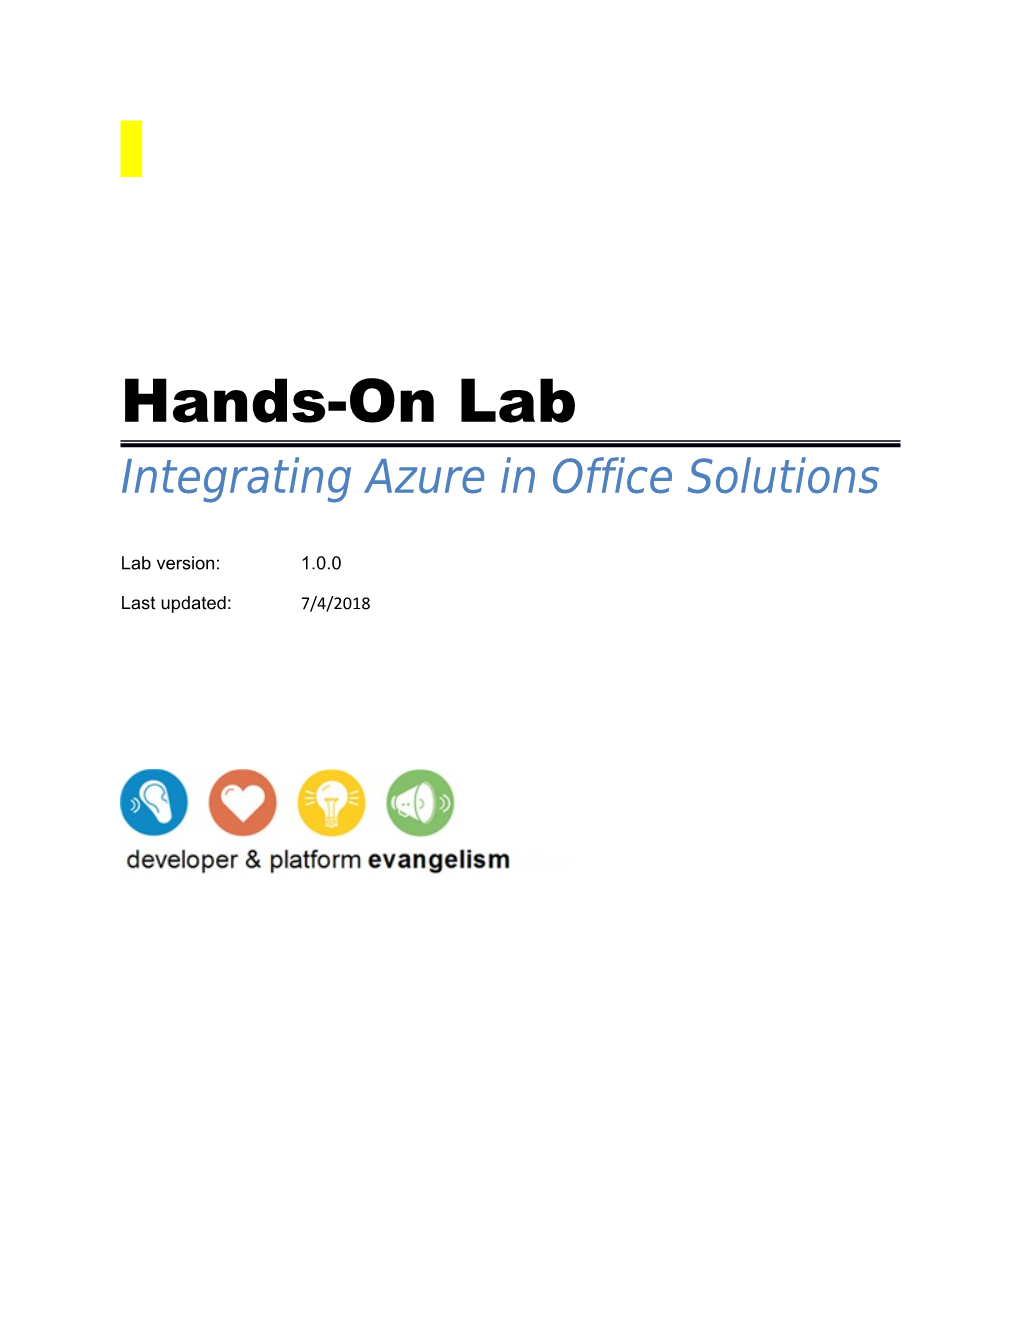 Integrating Azure in Office Solutions